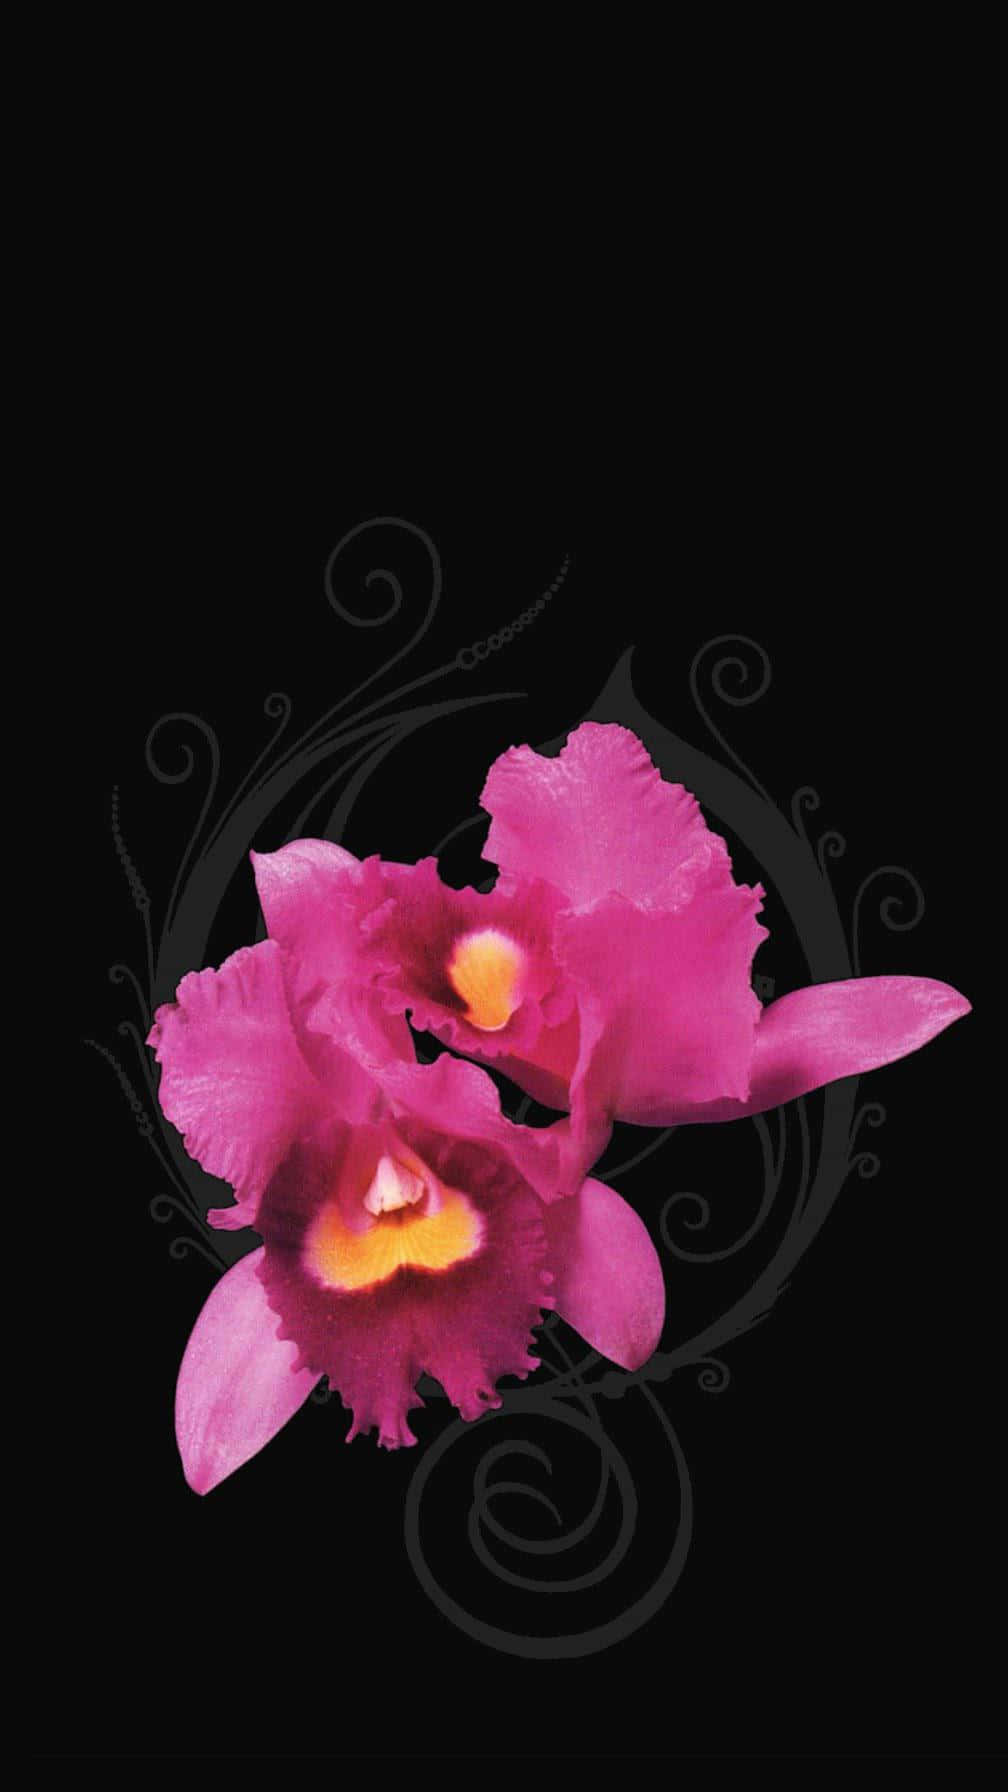 Elegant Purple Orchid on a Wooden Surface